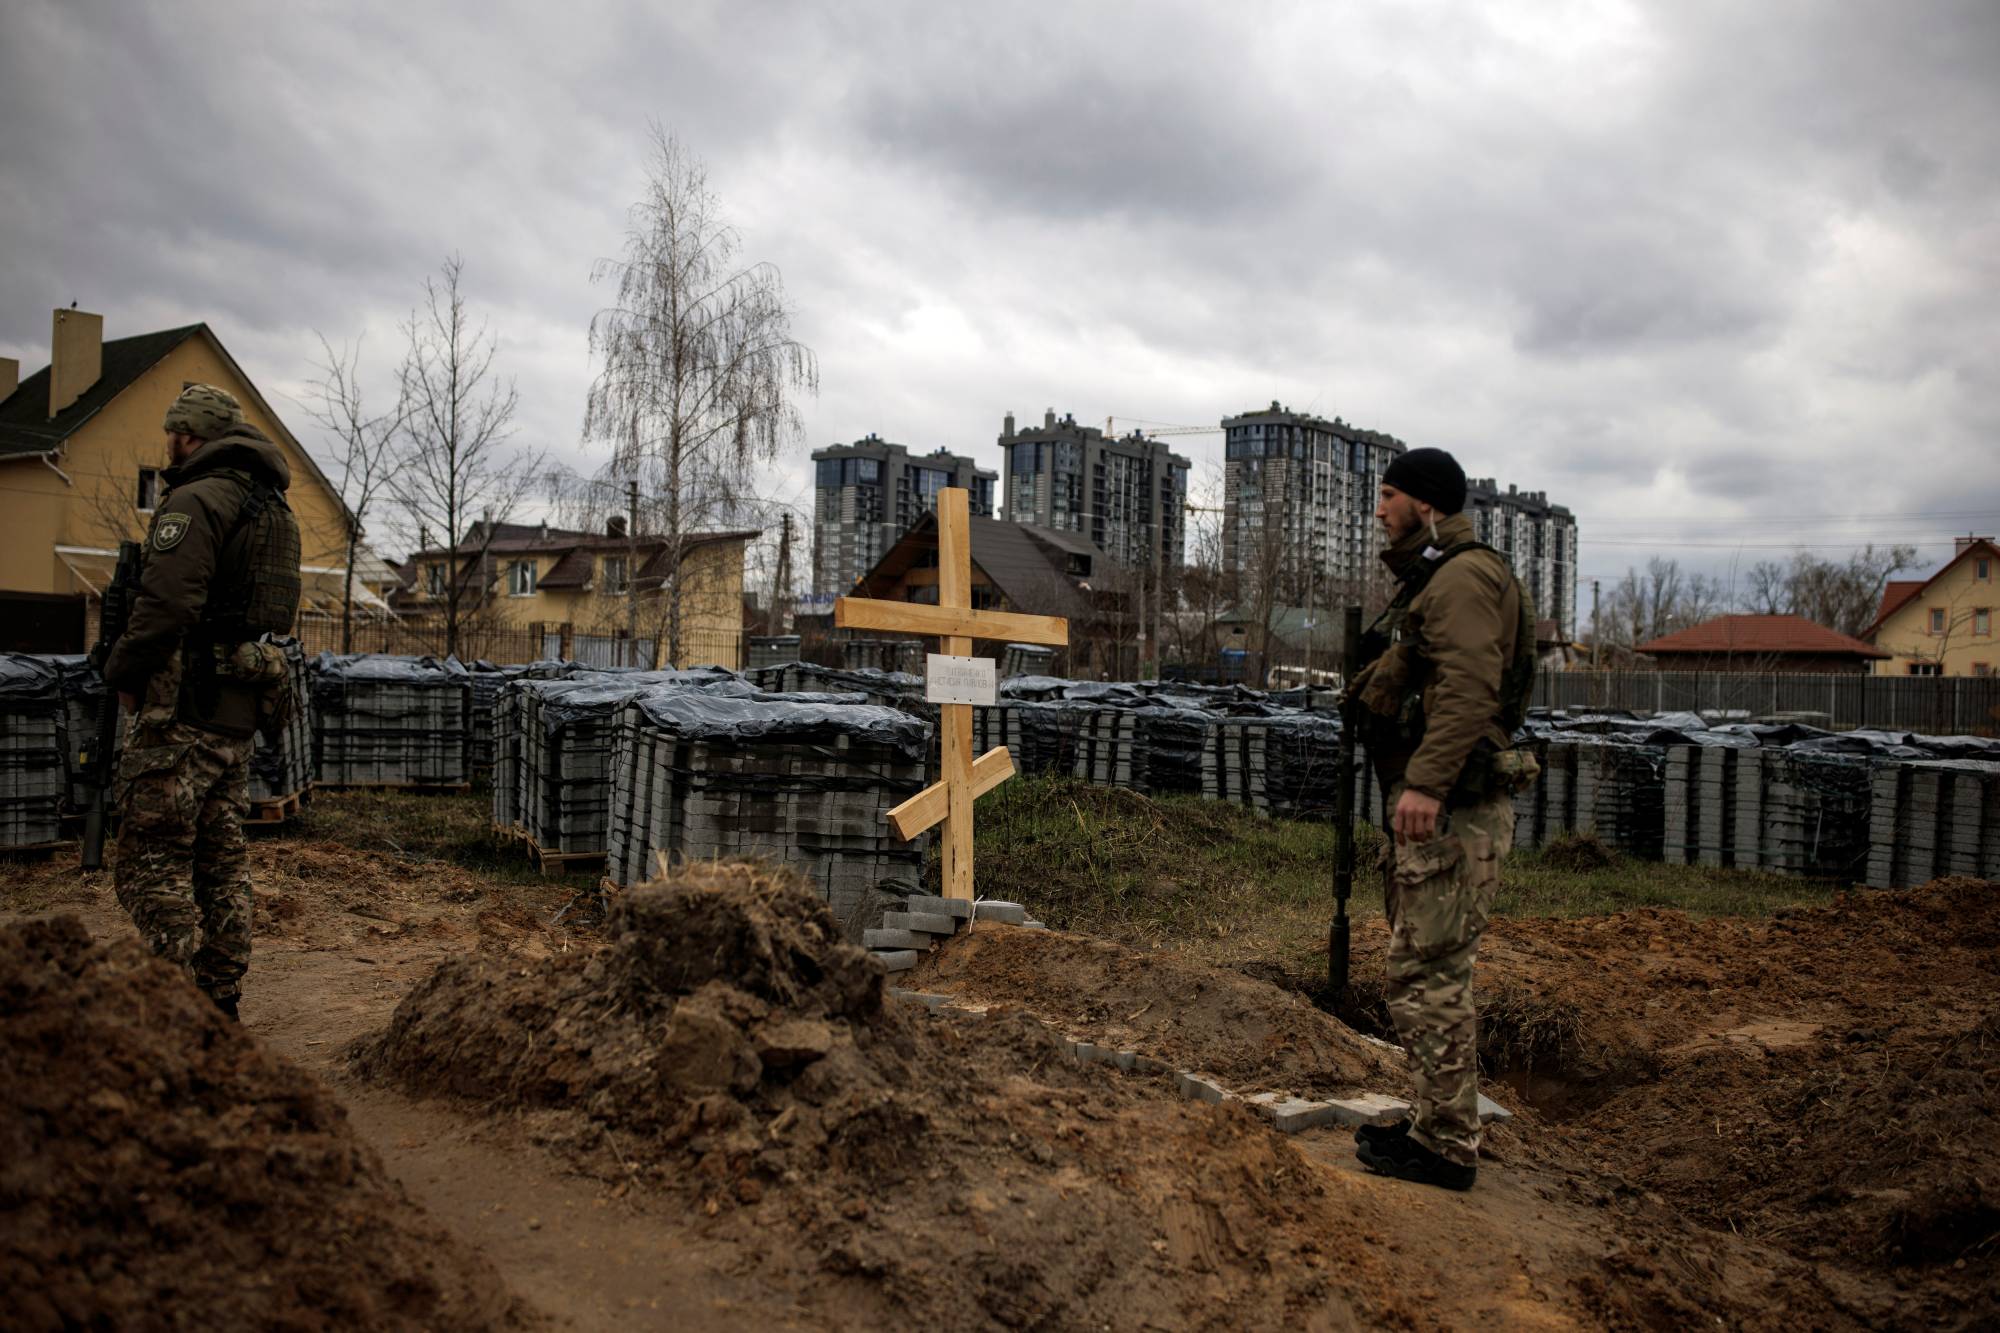 Ukrainian soldiers stand next to the grave of a civilian in the city of Bucha, Ukraine, who according to residents was killed by Russian soldiers during their occupation of the area, on April 6.  | REUTERS